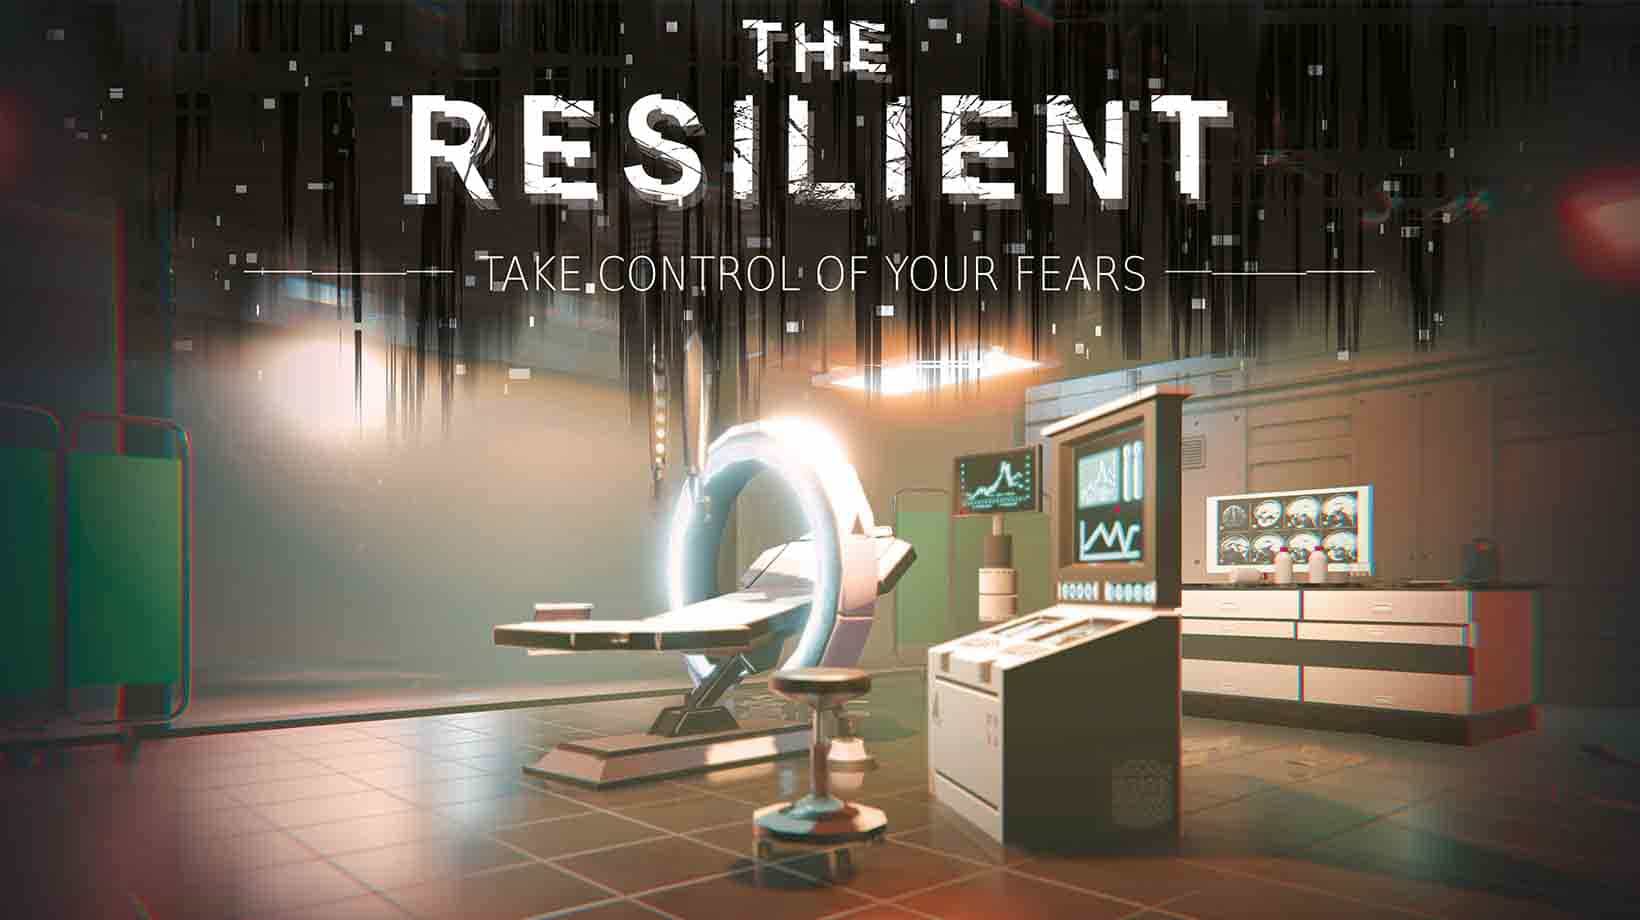 The resilient